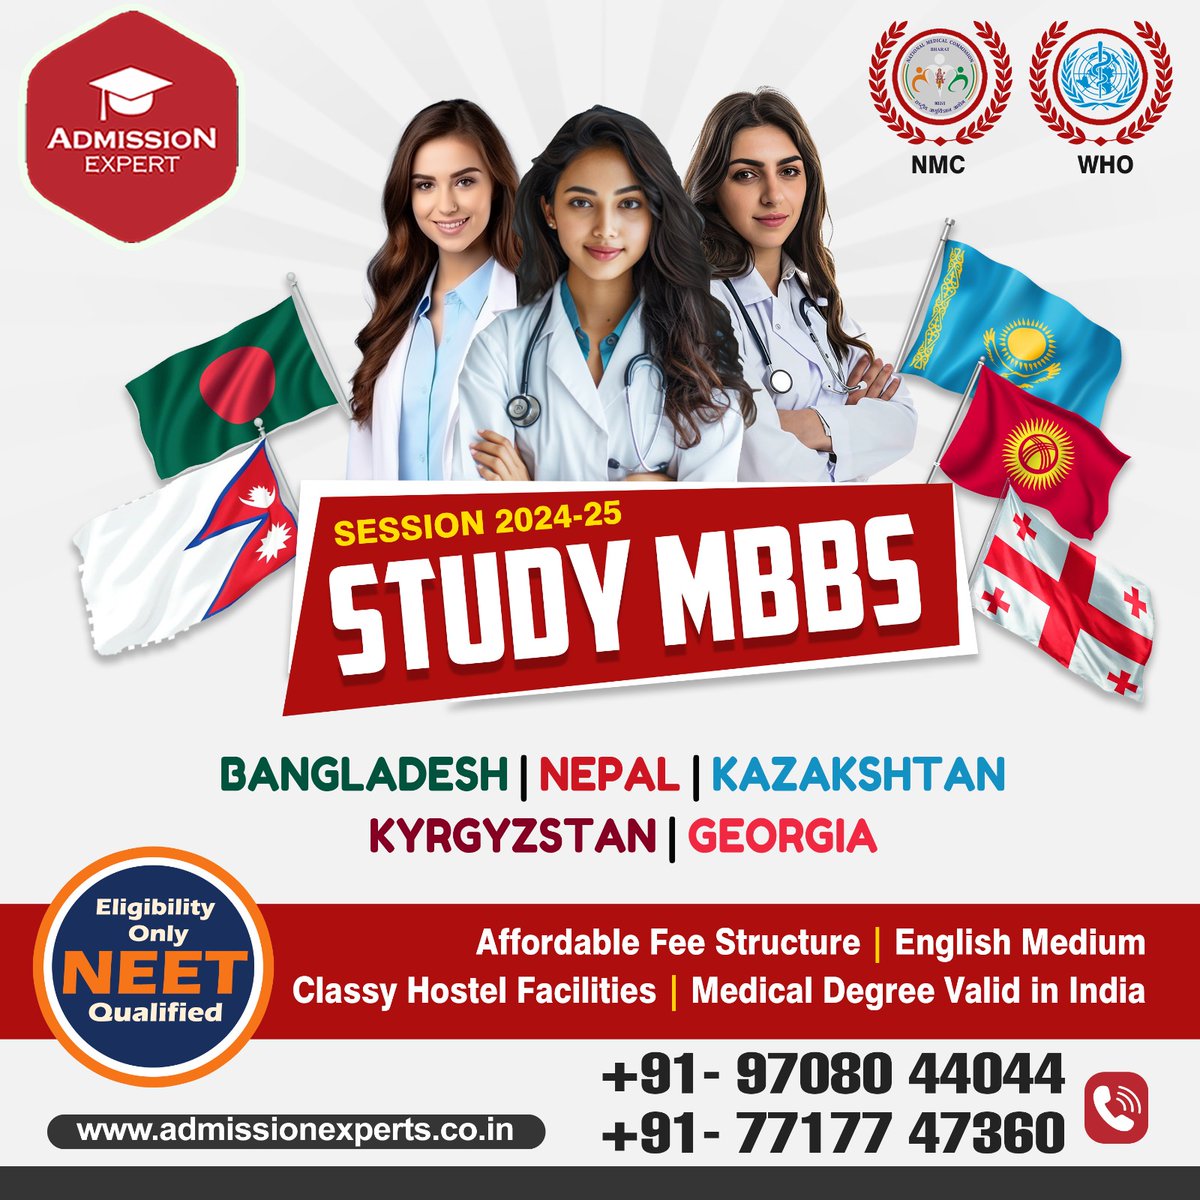 Are you aspiring to pursue MBBS from prestigious universities abroad? Let Admission Expert be your guide to achieving your dreams in #Bangladesh, #Nepal, #Kyrgyzstan, #Georgia and #Kazakhstan!
#AdmisionExpert #BestaAdmissionConsultancyinPatna #MBBSAbroad #MedicalEducation #NEET